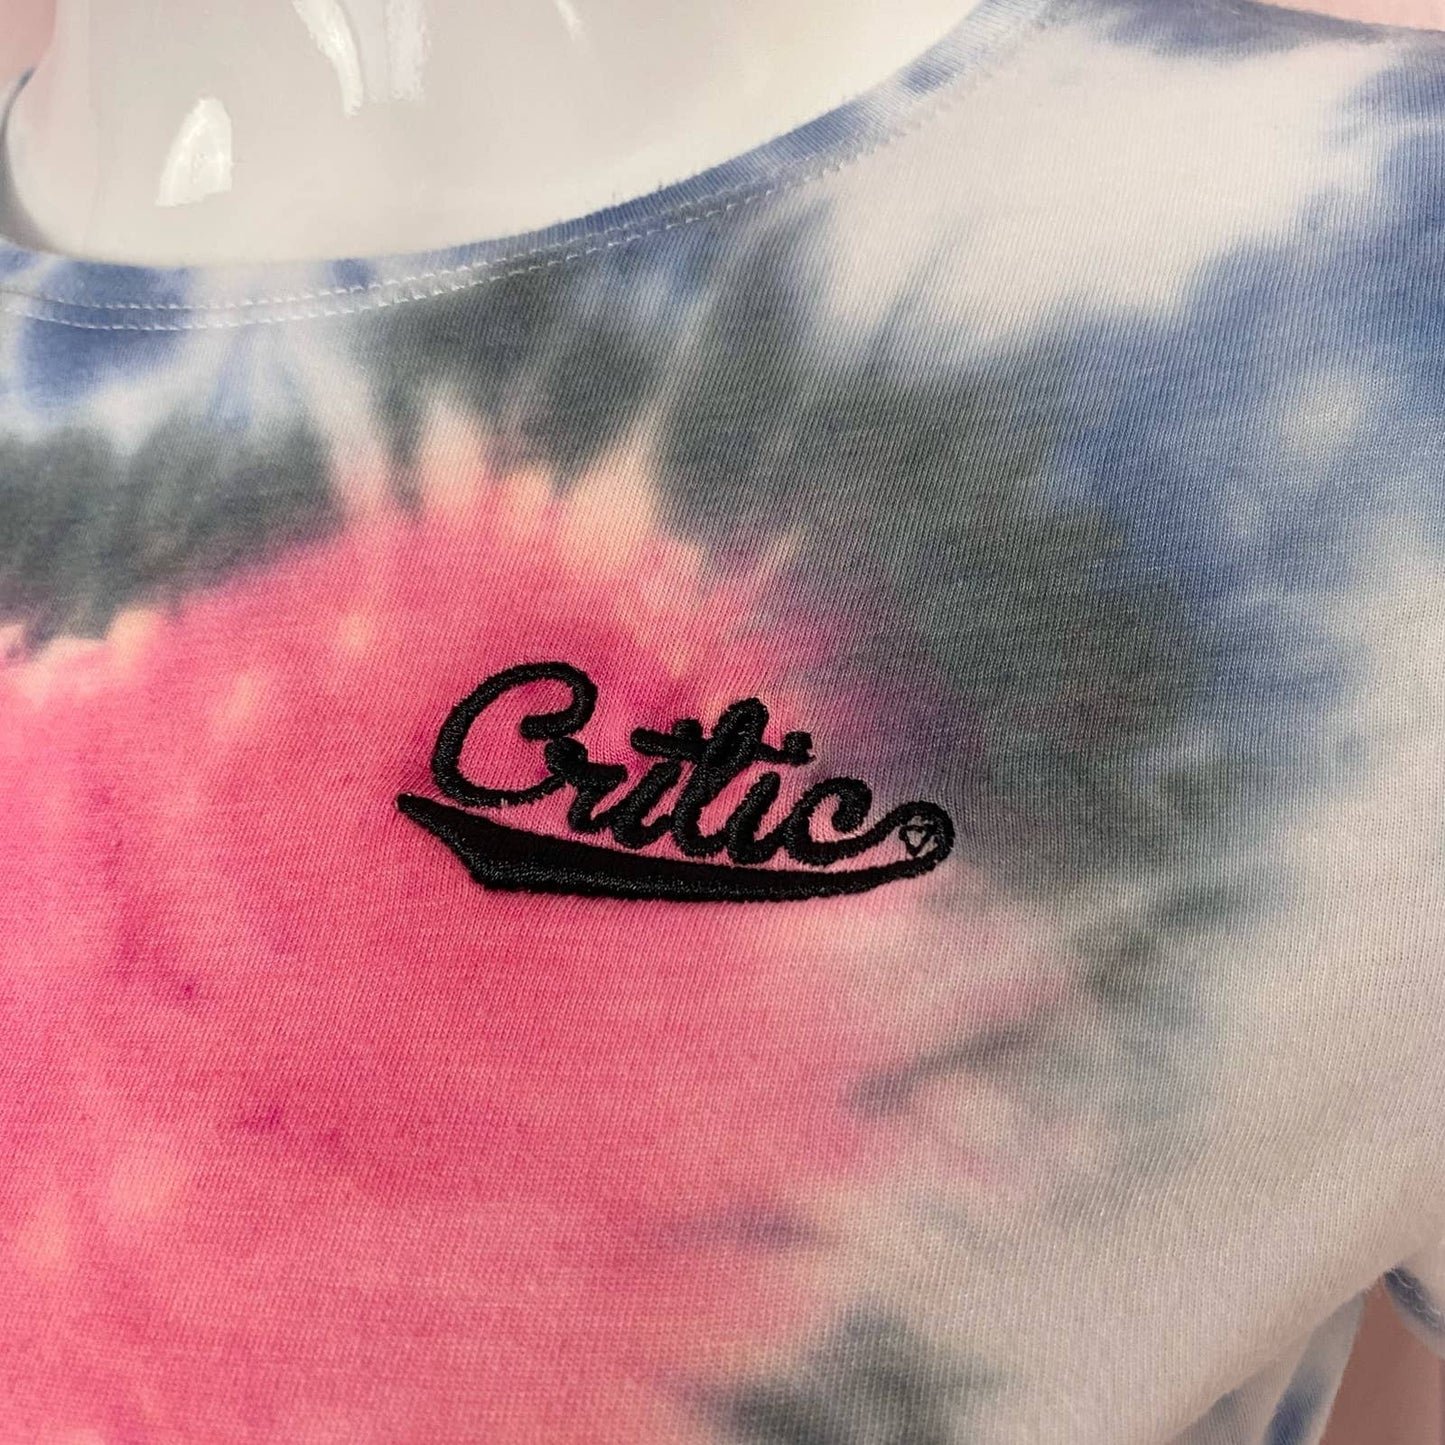 Reworked Critic Heart Tie Dye Crop Baby Tee, Size Small